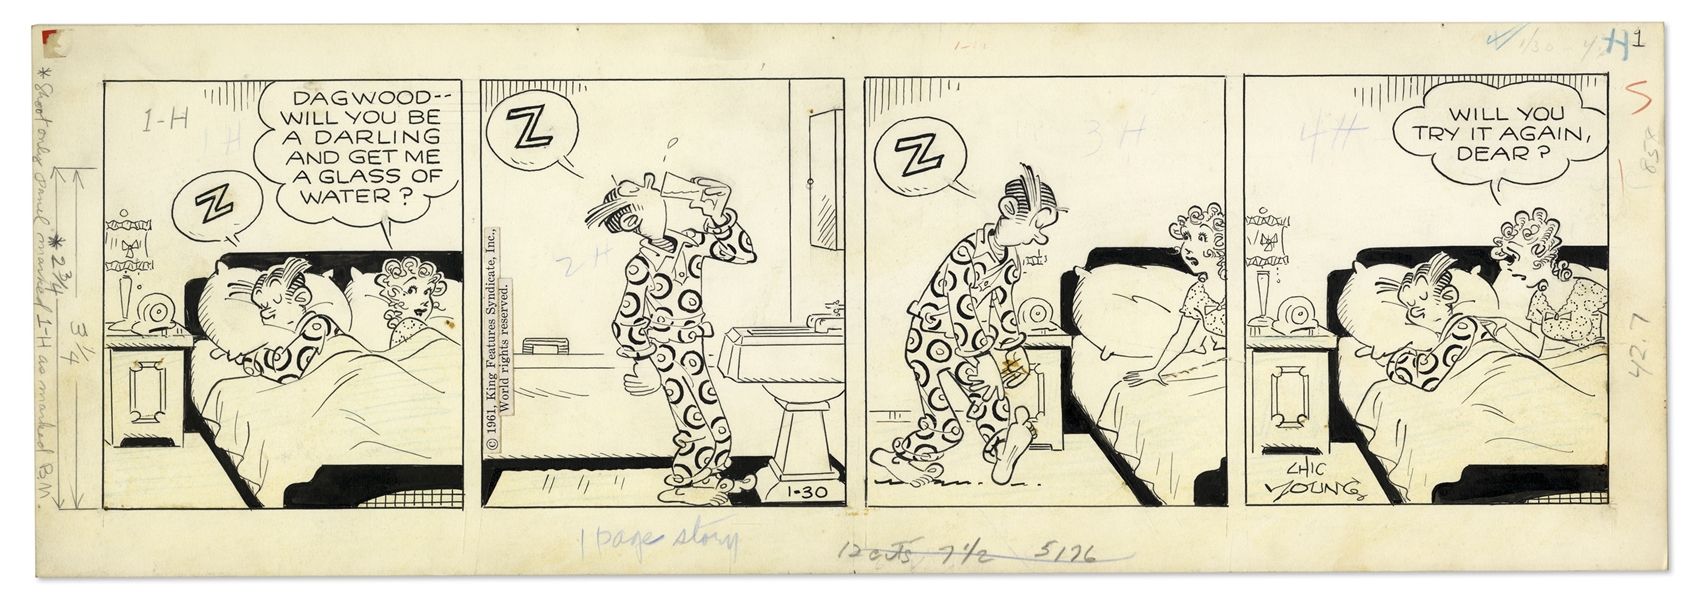 2 Chic Young Hand-Drawn ''Blondie'' Comic Strips From 1961 -- With Chic Young's Original Preliminary Artwork for Both